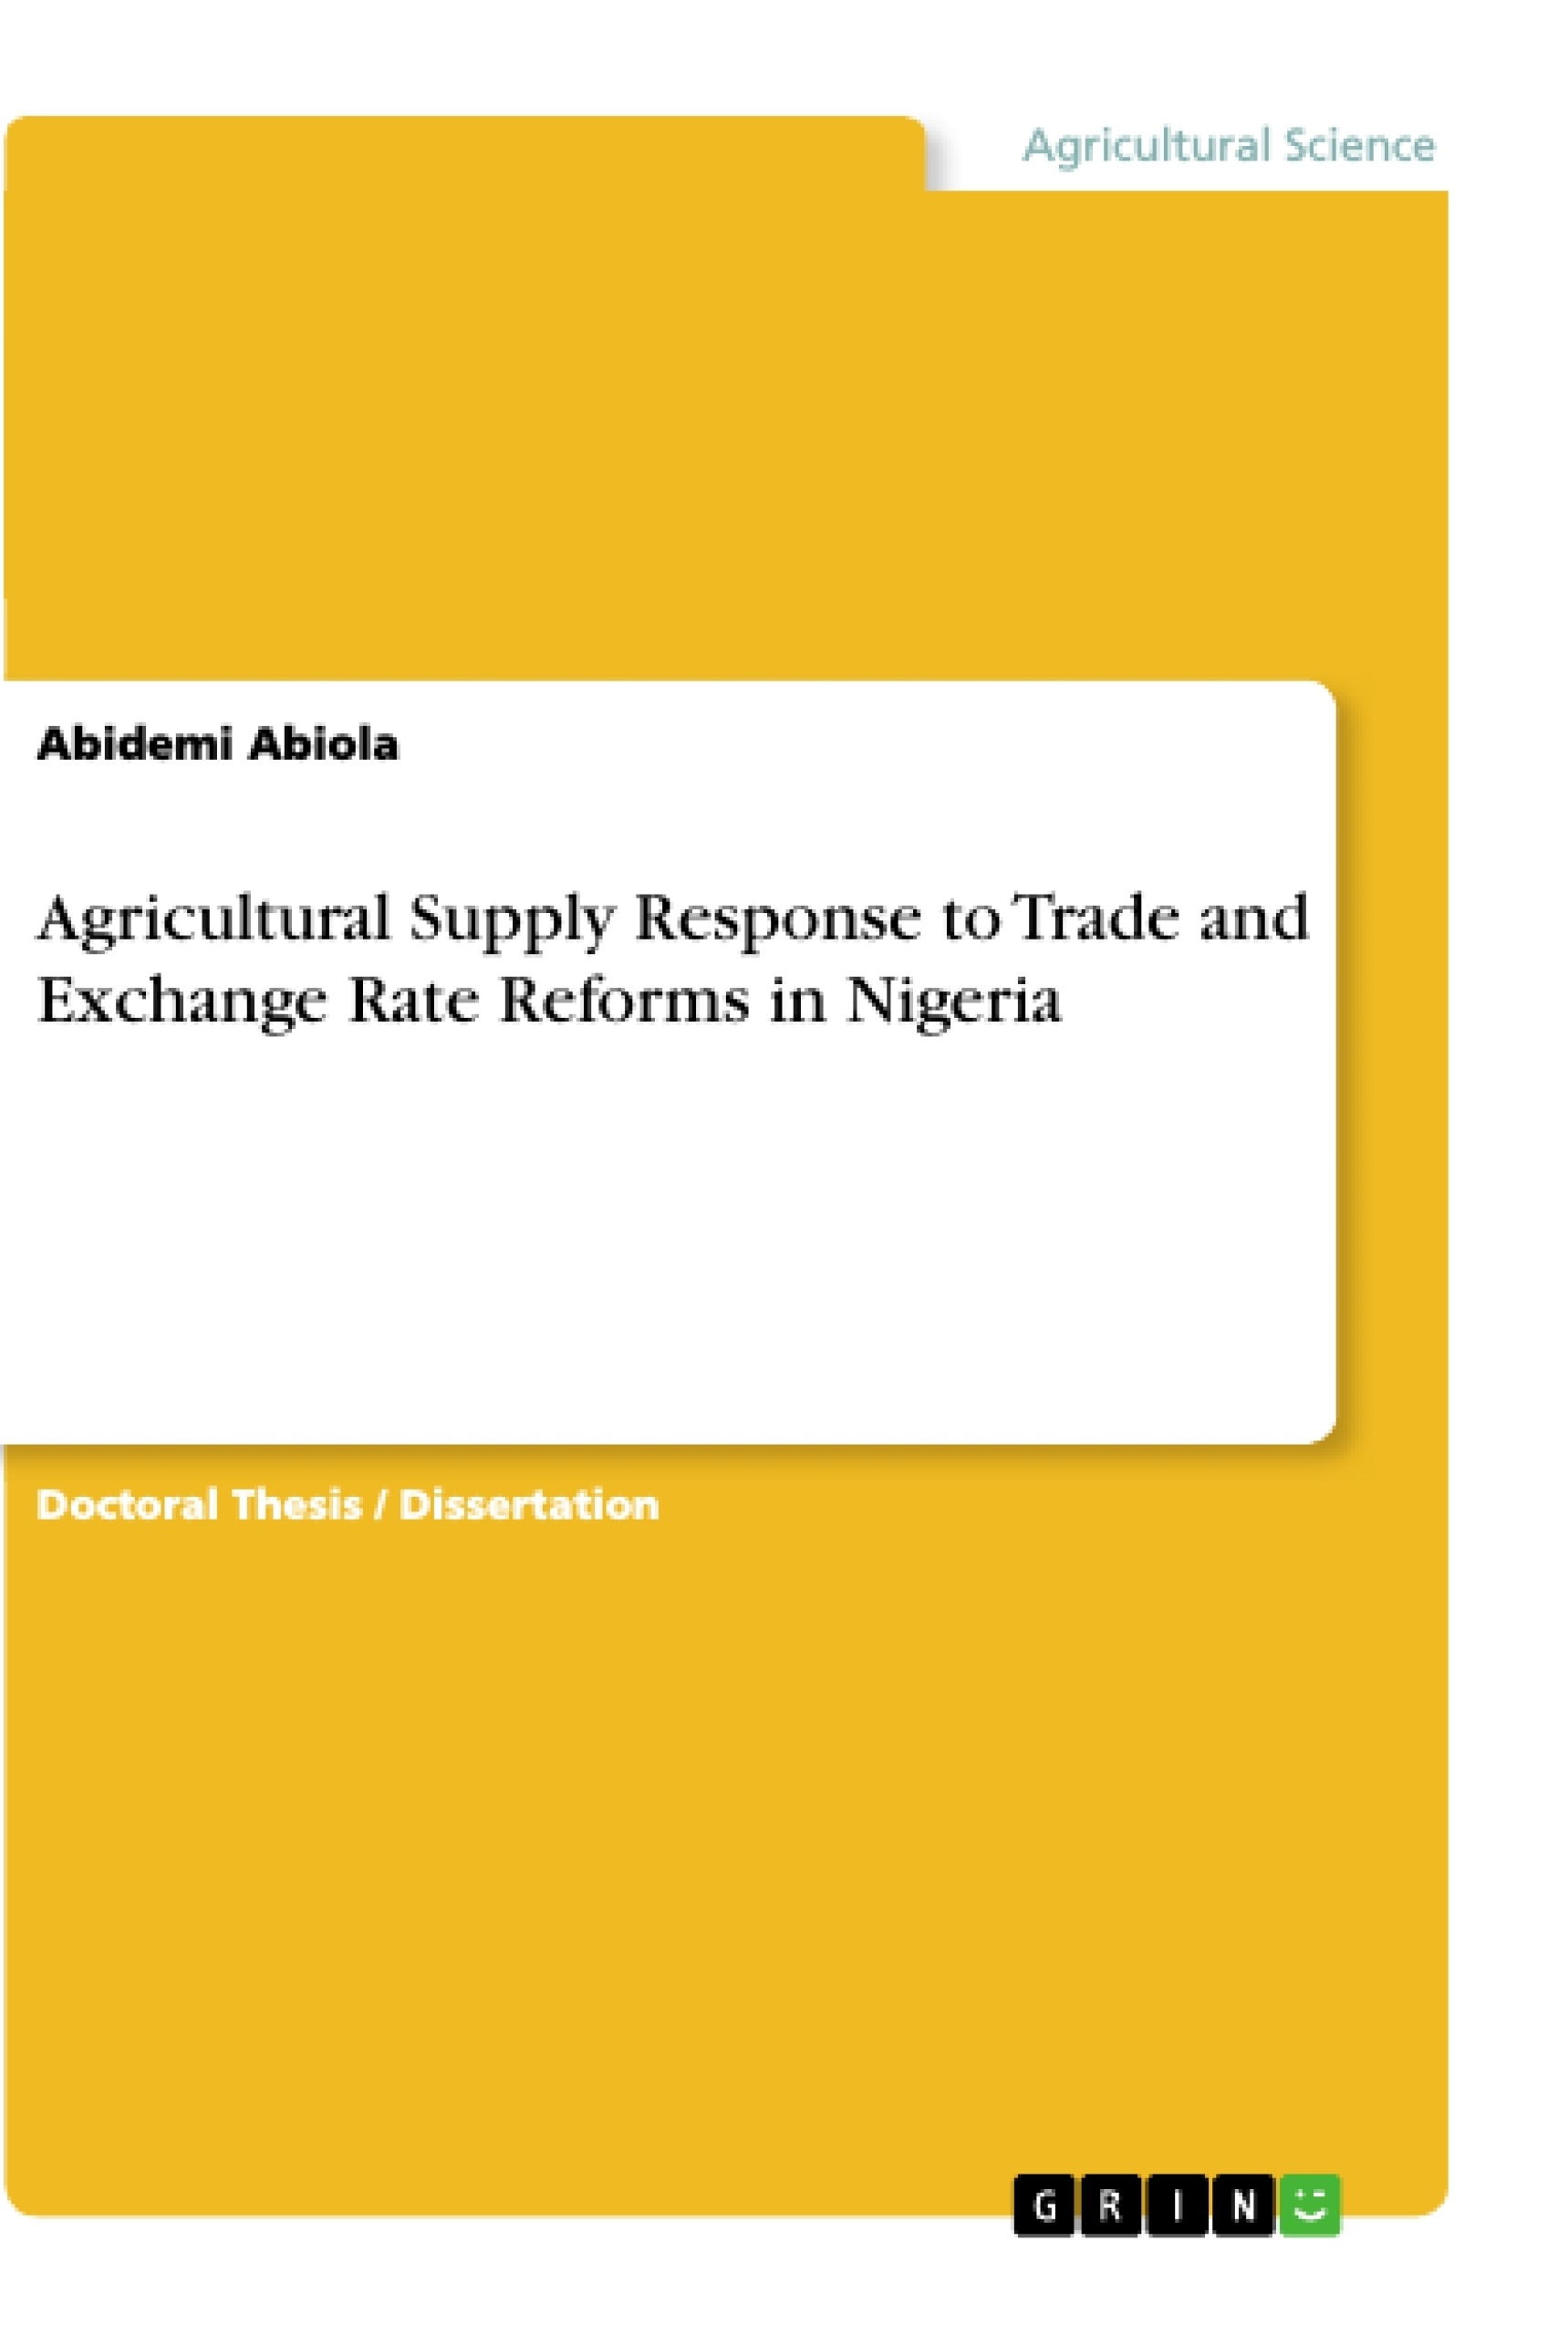 Titre: Agricultural Supply Response to Trade and Exchange Rate Reforms in Nigeria